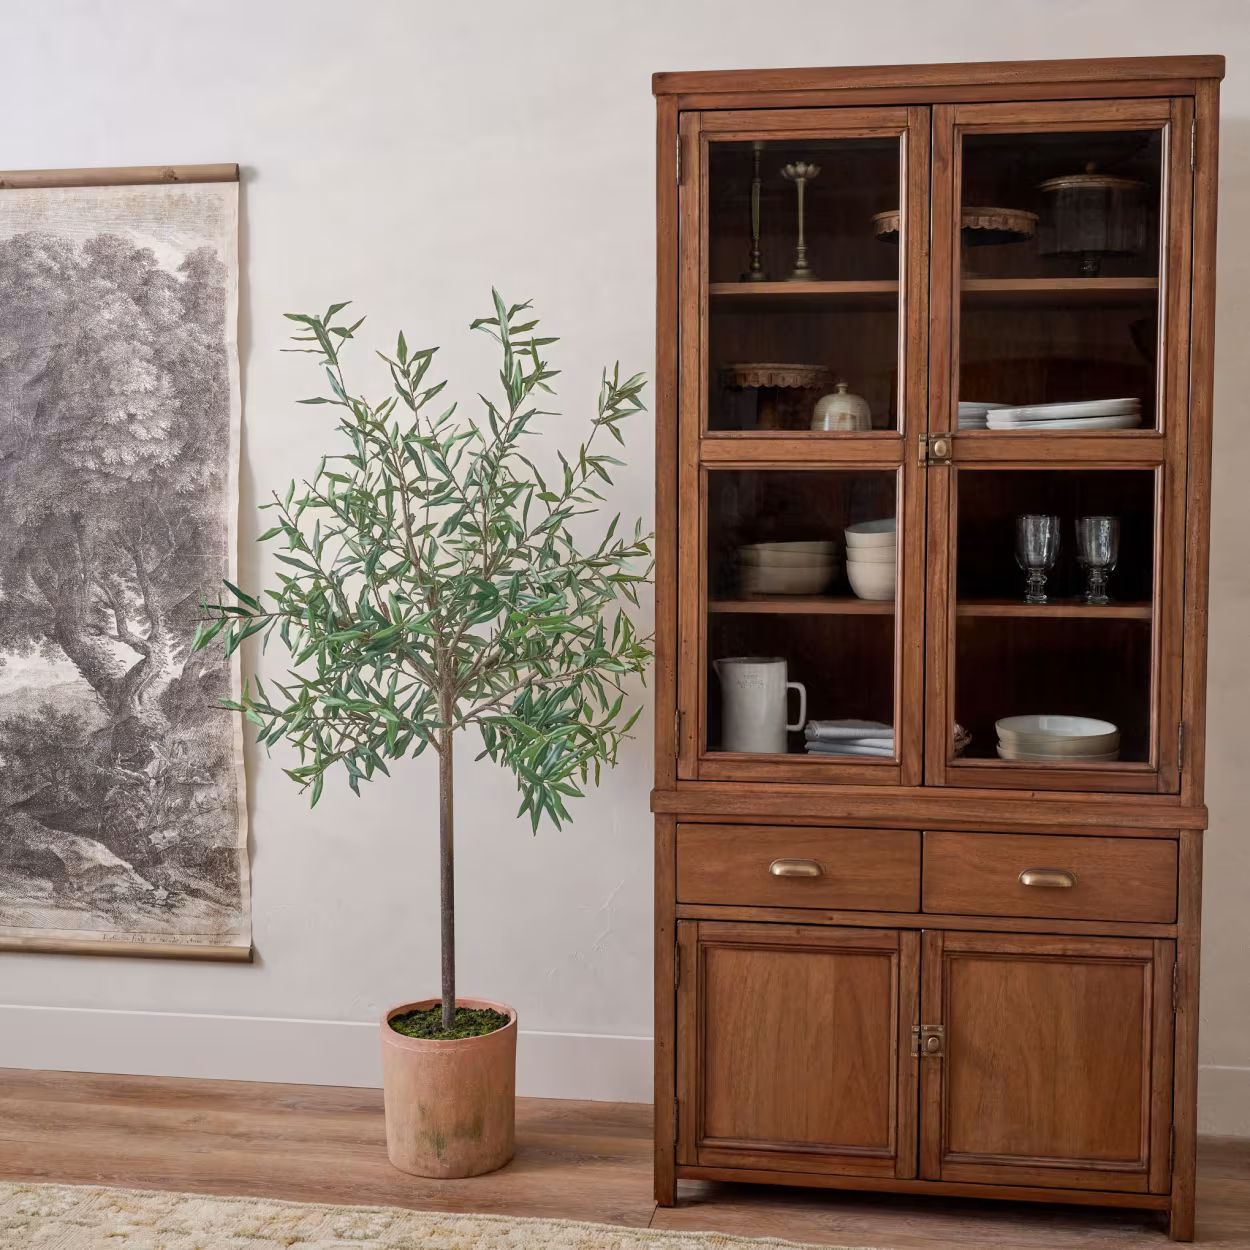 70" Olive Tree in Clay Pot Green | Magnolia